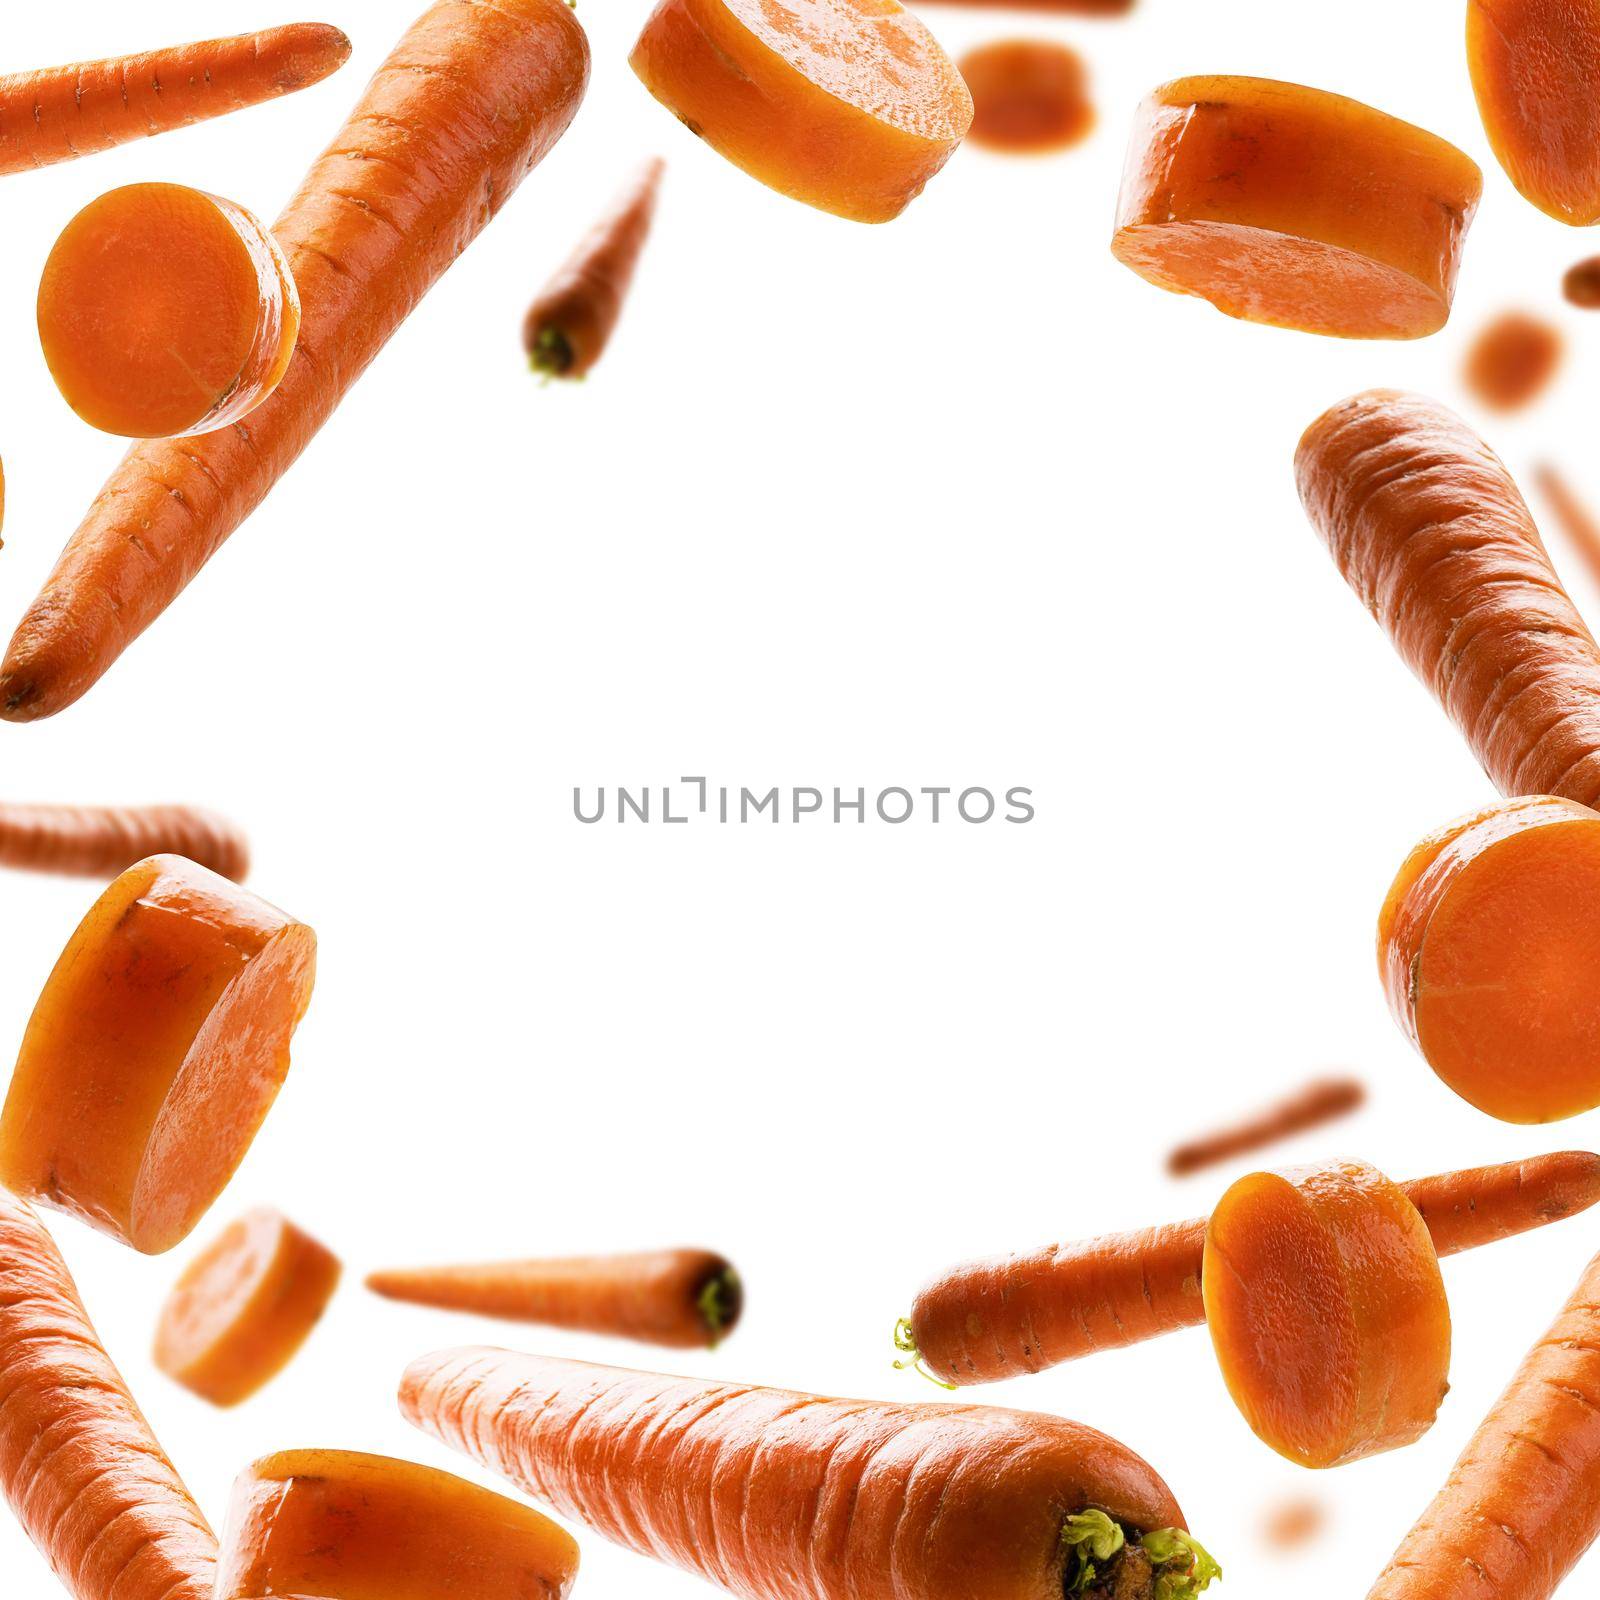 Ripe carrots whole and sliced levitate on a white background.